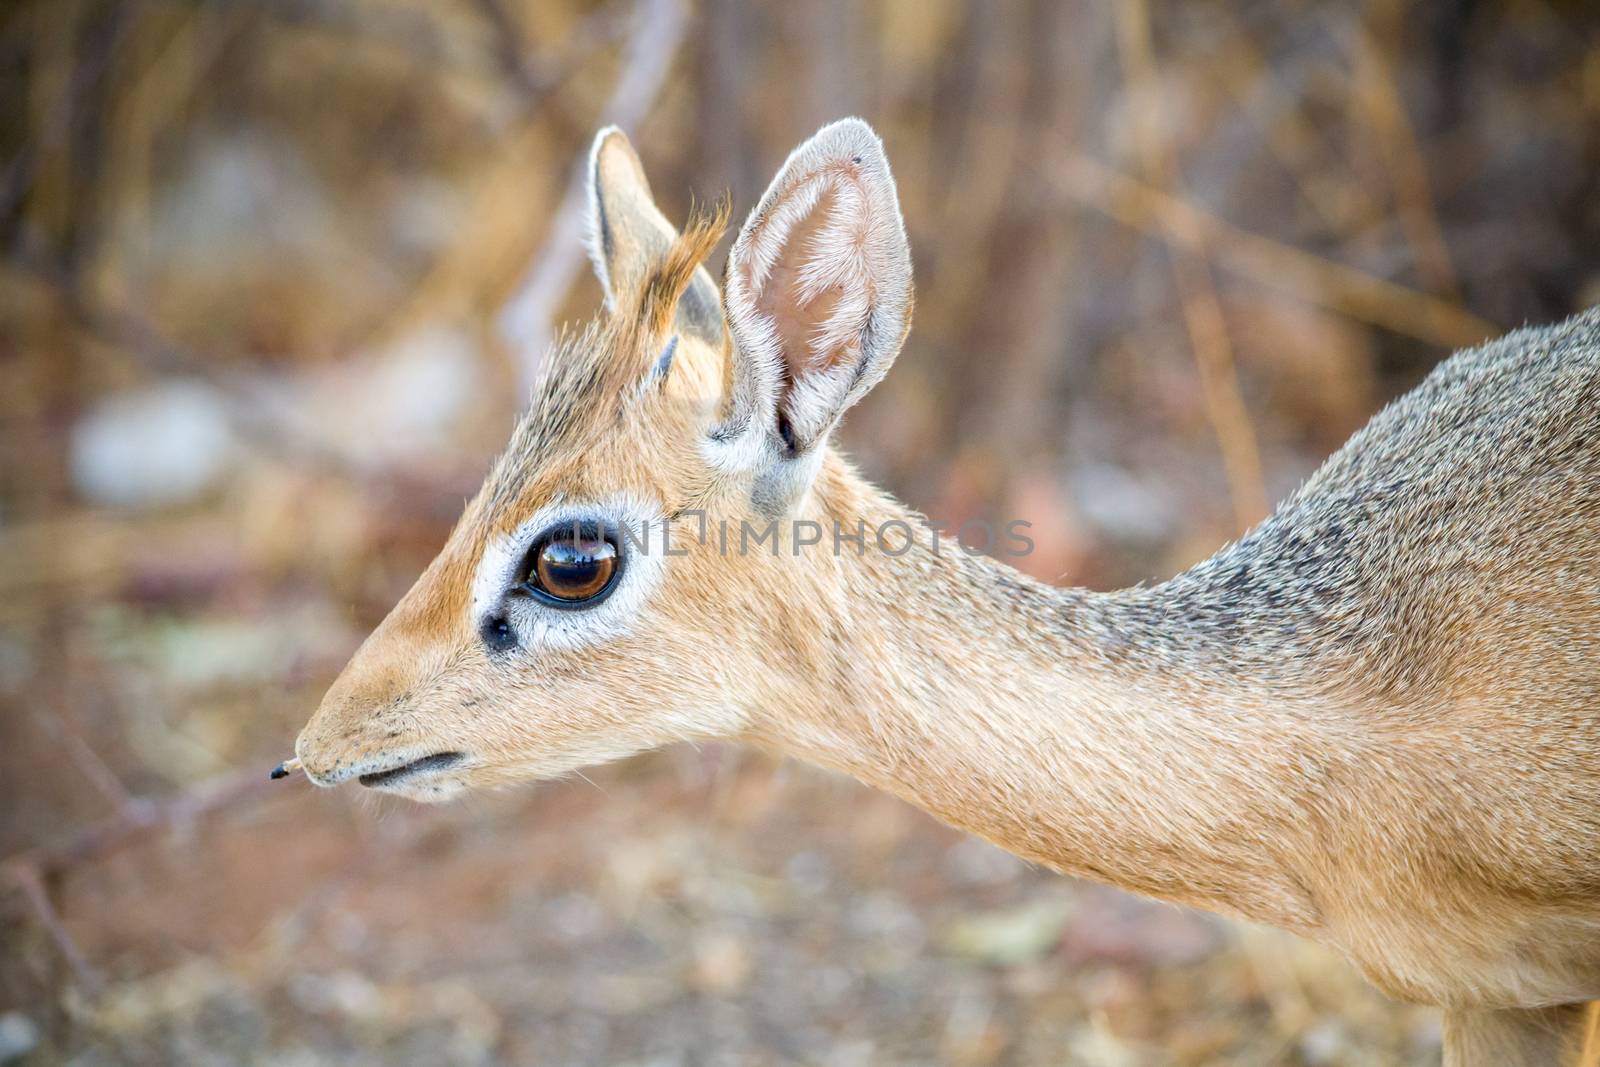 Dik-dik close-up: small antelope in the genus Madoqua that live in the bushlands of eastern and southern Africa by kb79